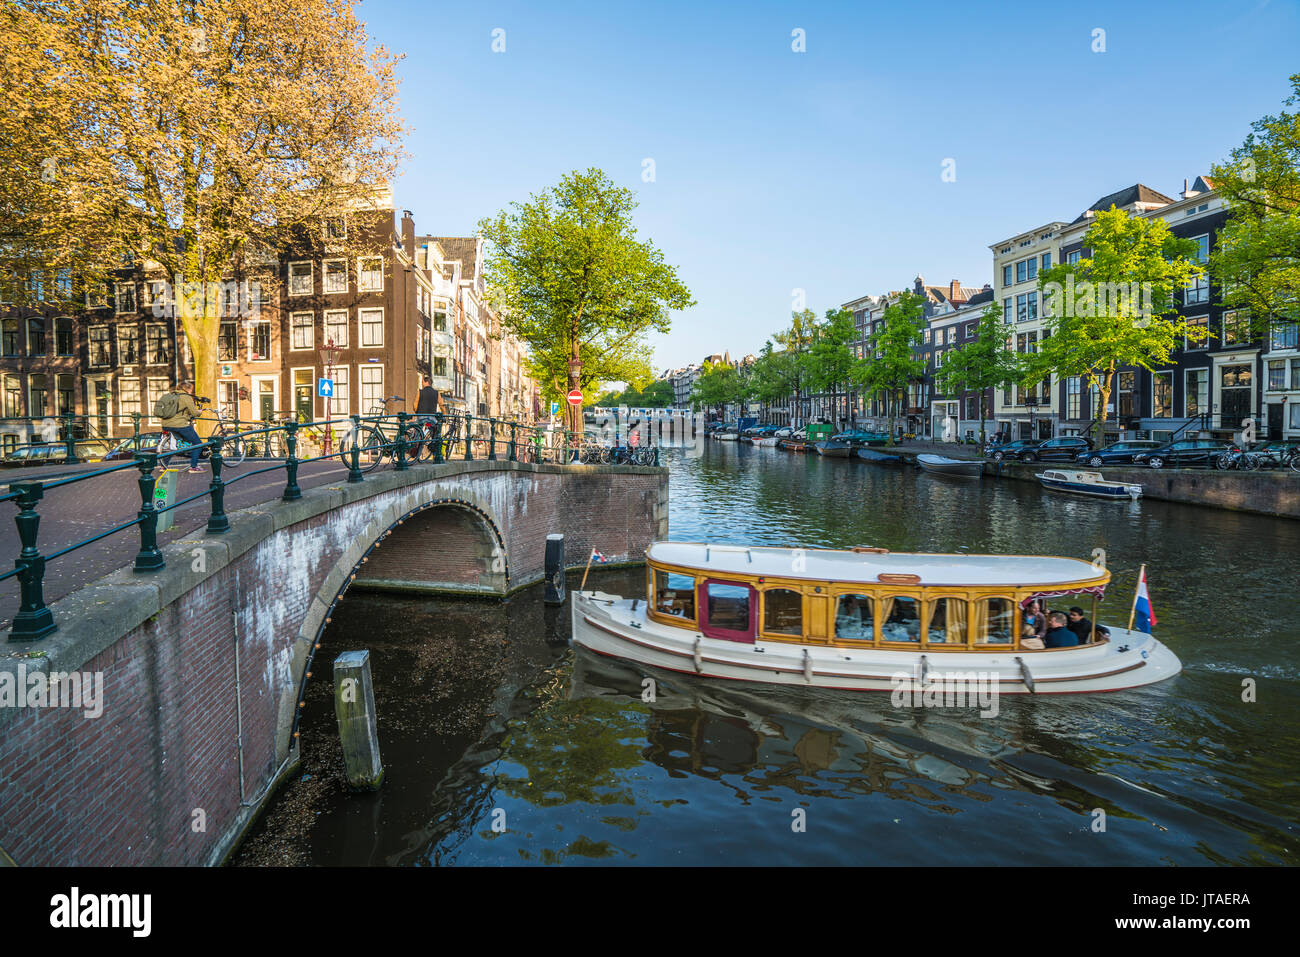 Canal Keisersgracht, Amsterdam, Pays-Bas, Europe Banque D'Images